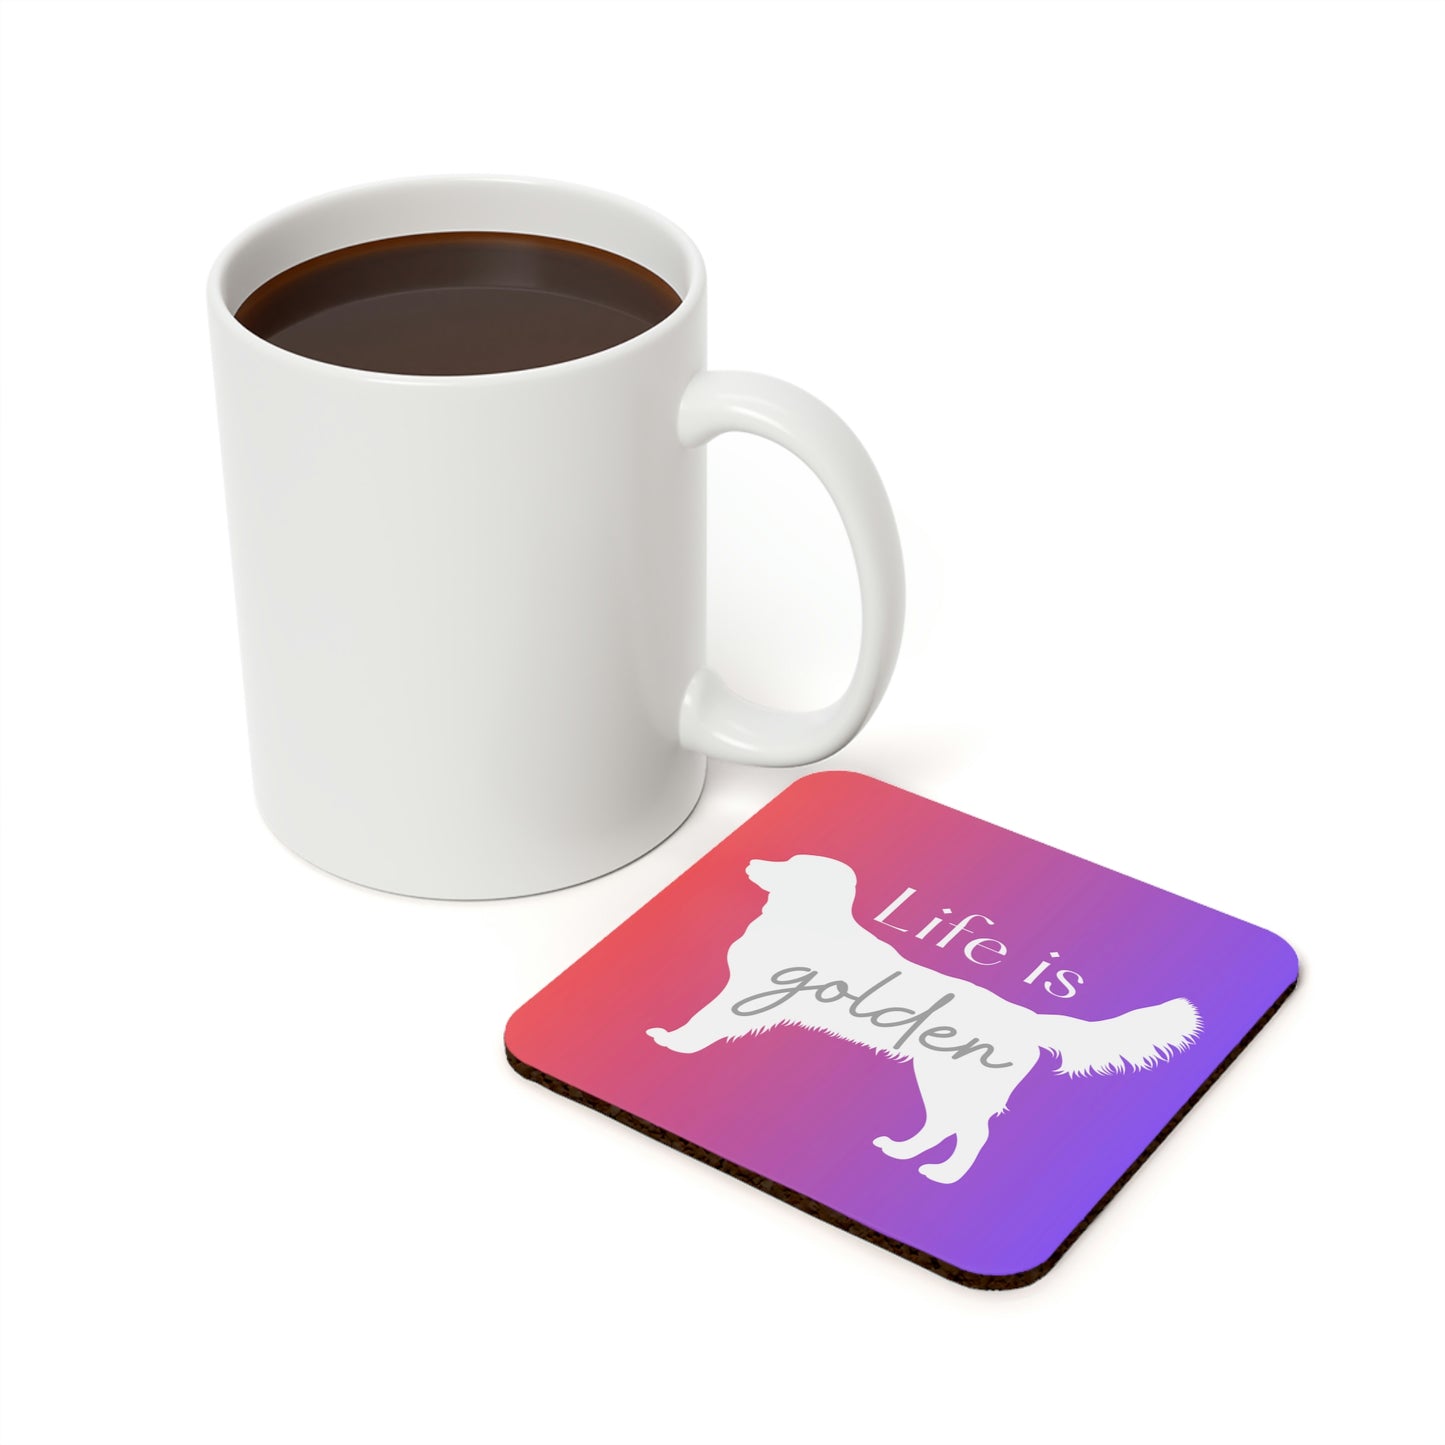 Life is Golden Cork Back Coaster (Red/Blue Ombre)